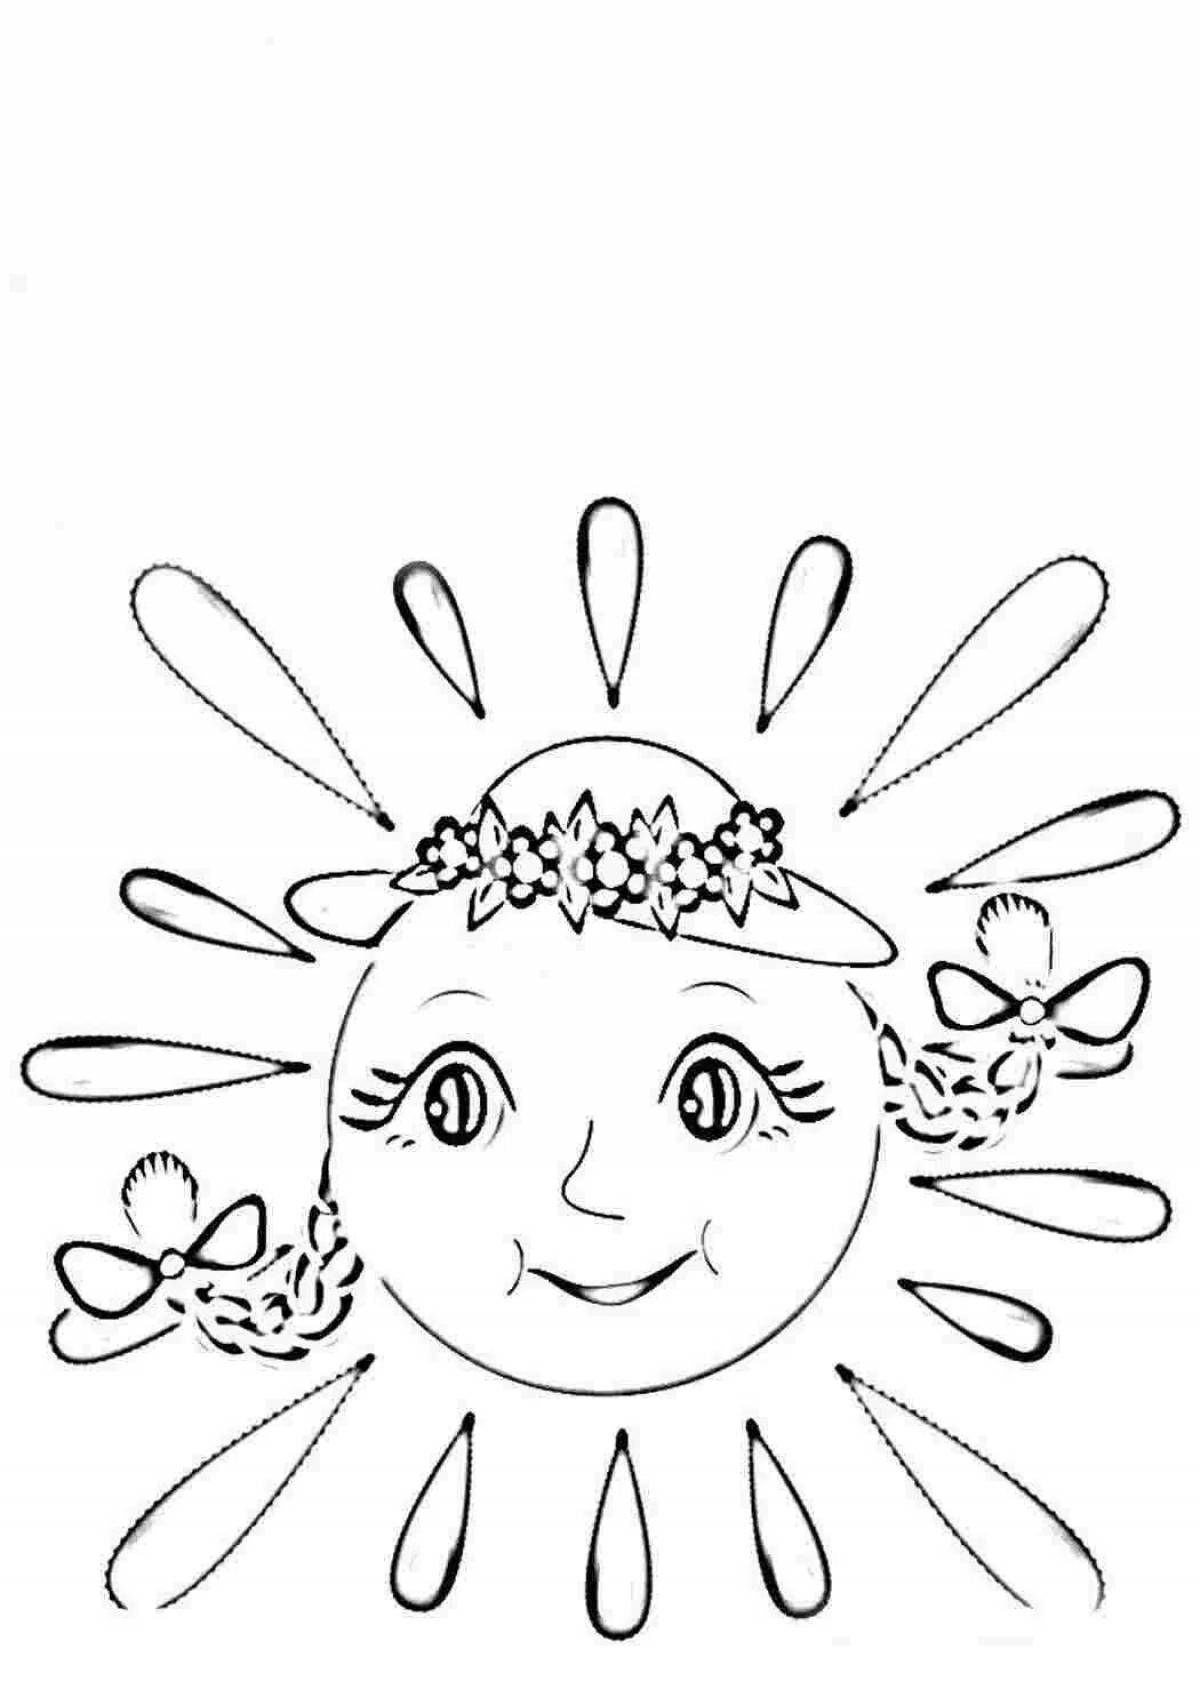 Charming carnival sun coloring page